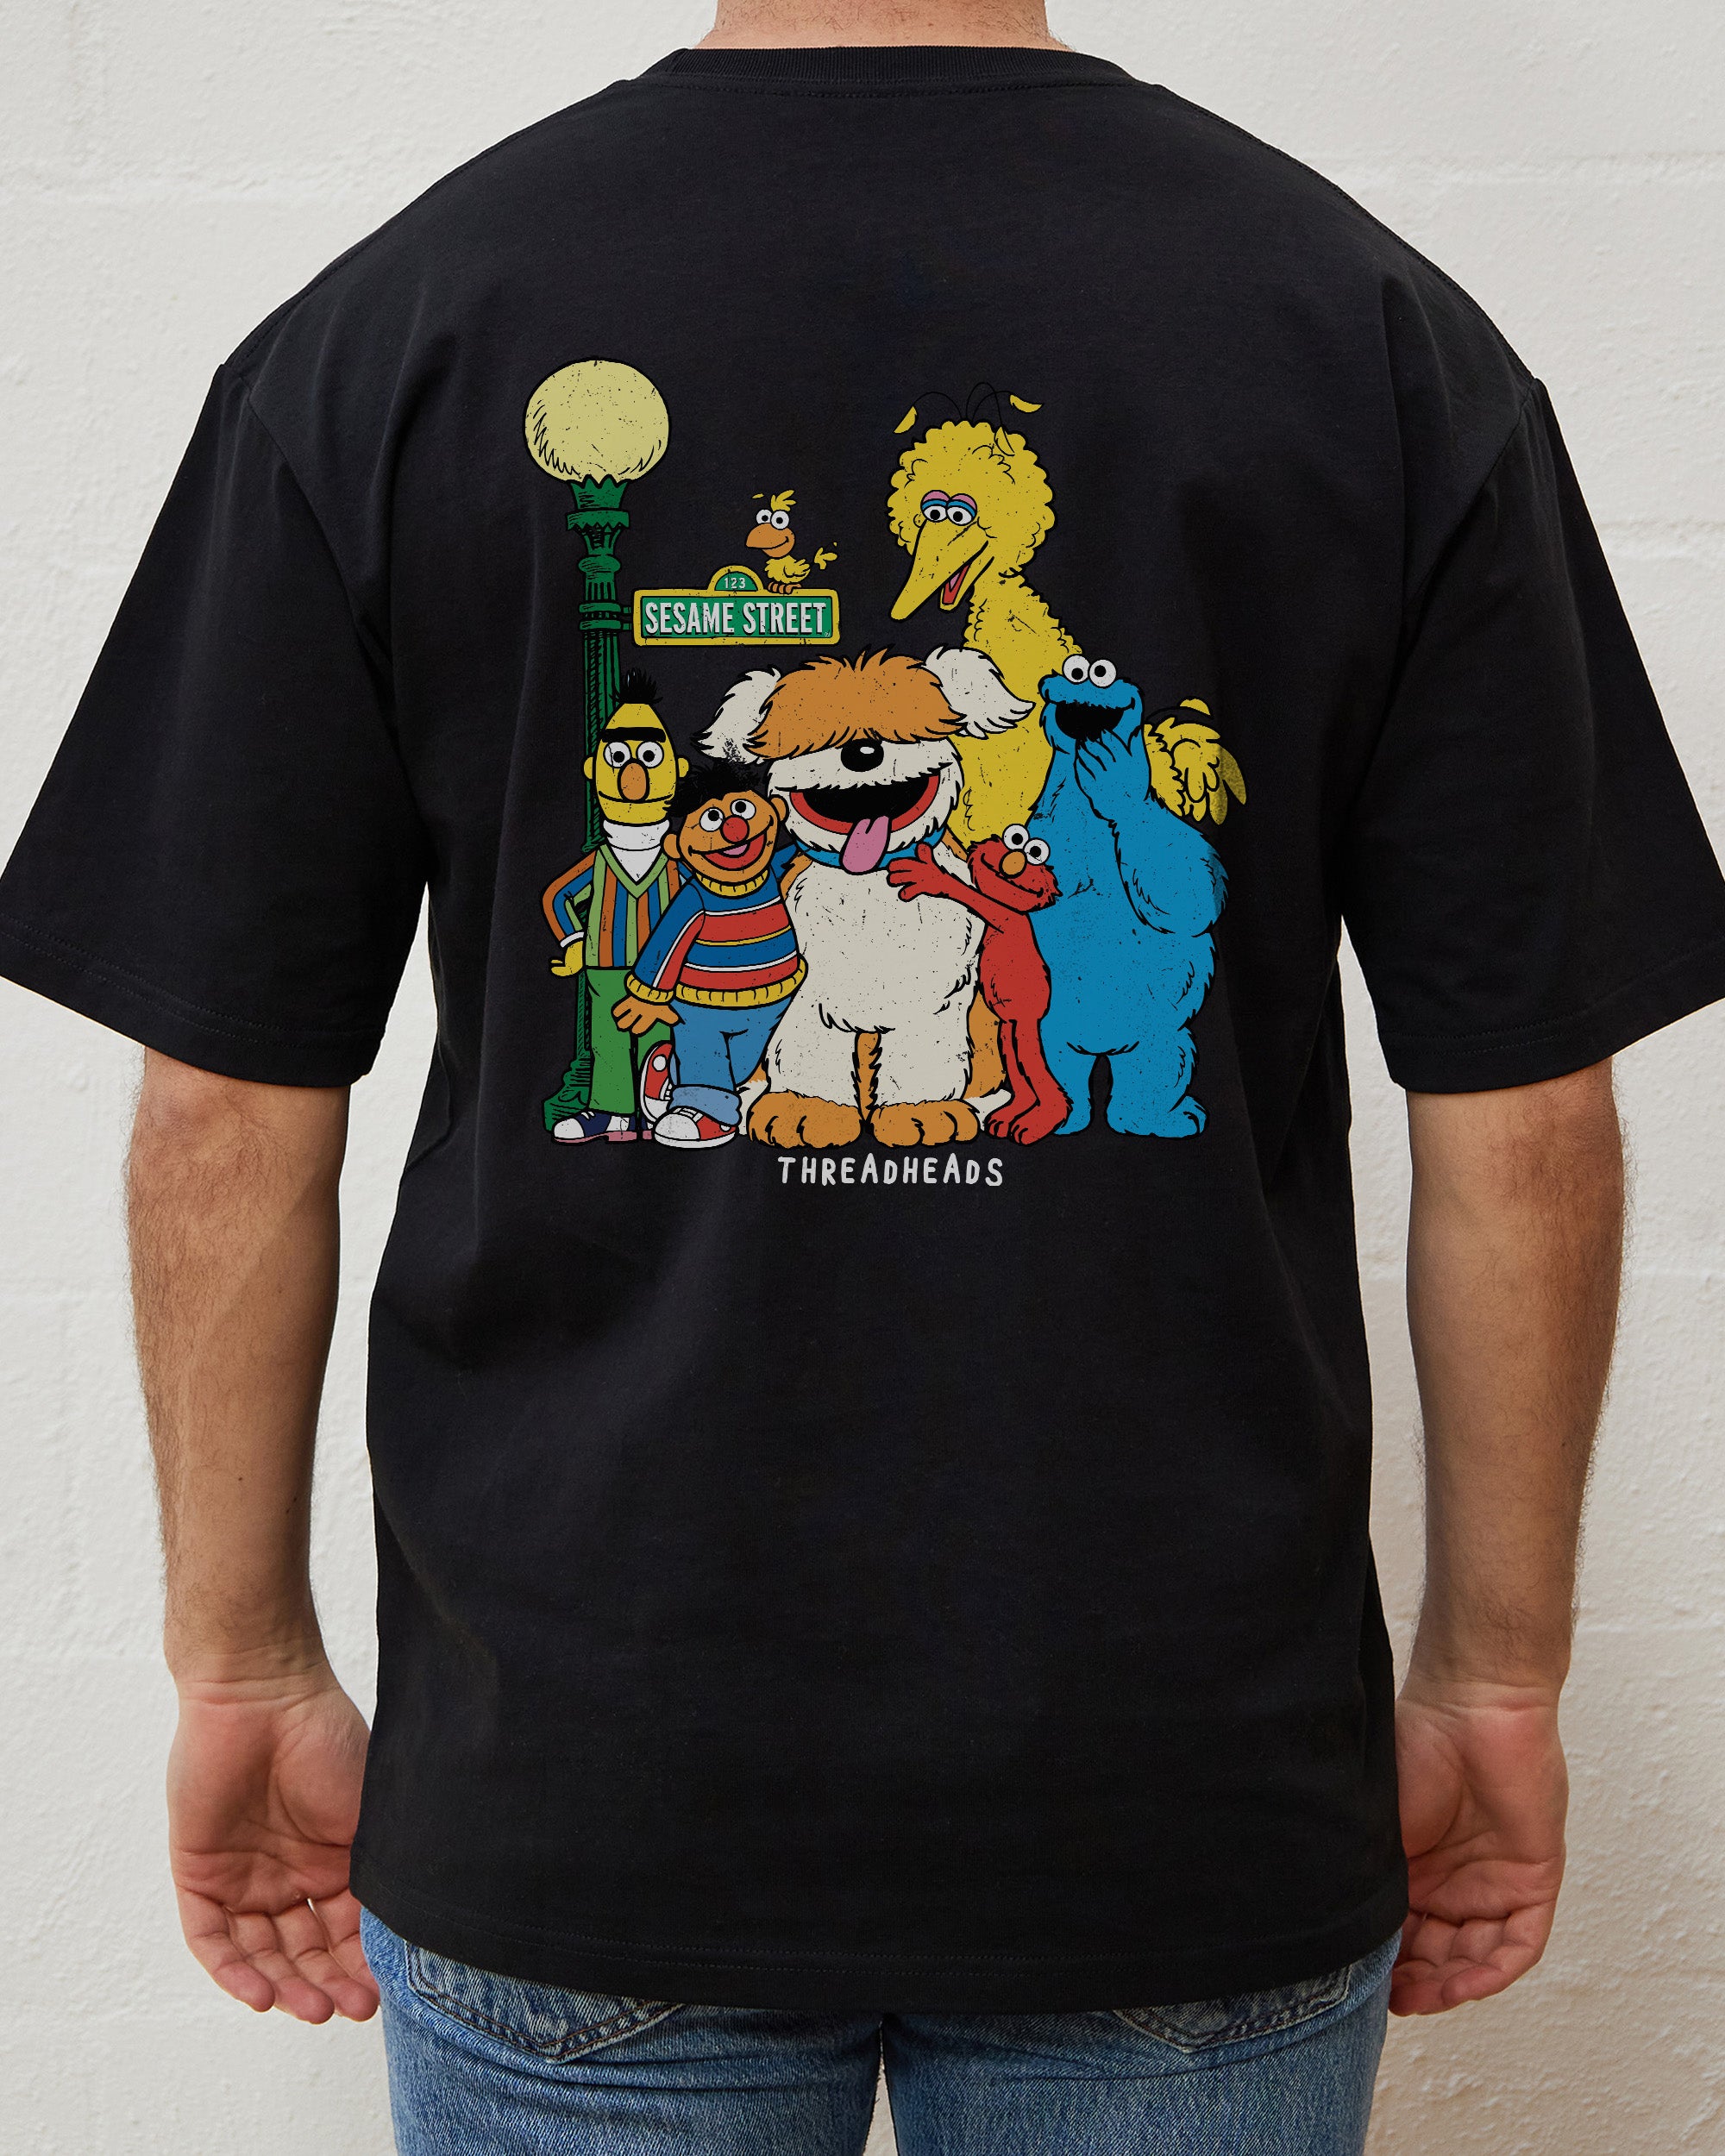 The Gang's All Here T-Shirt